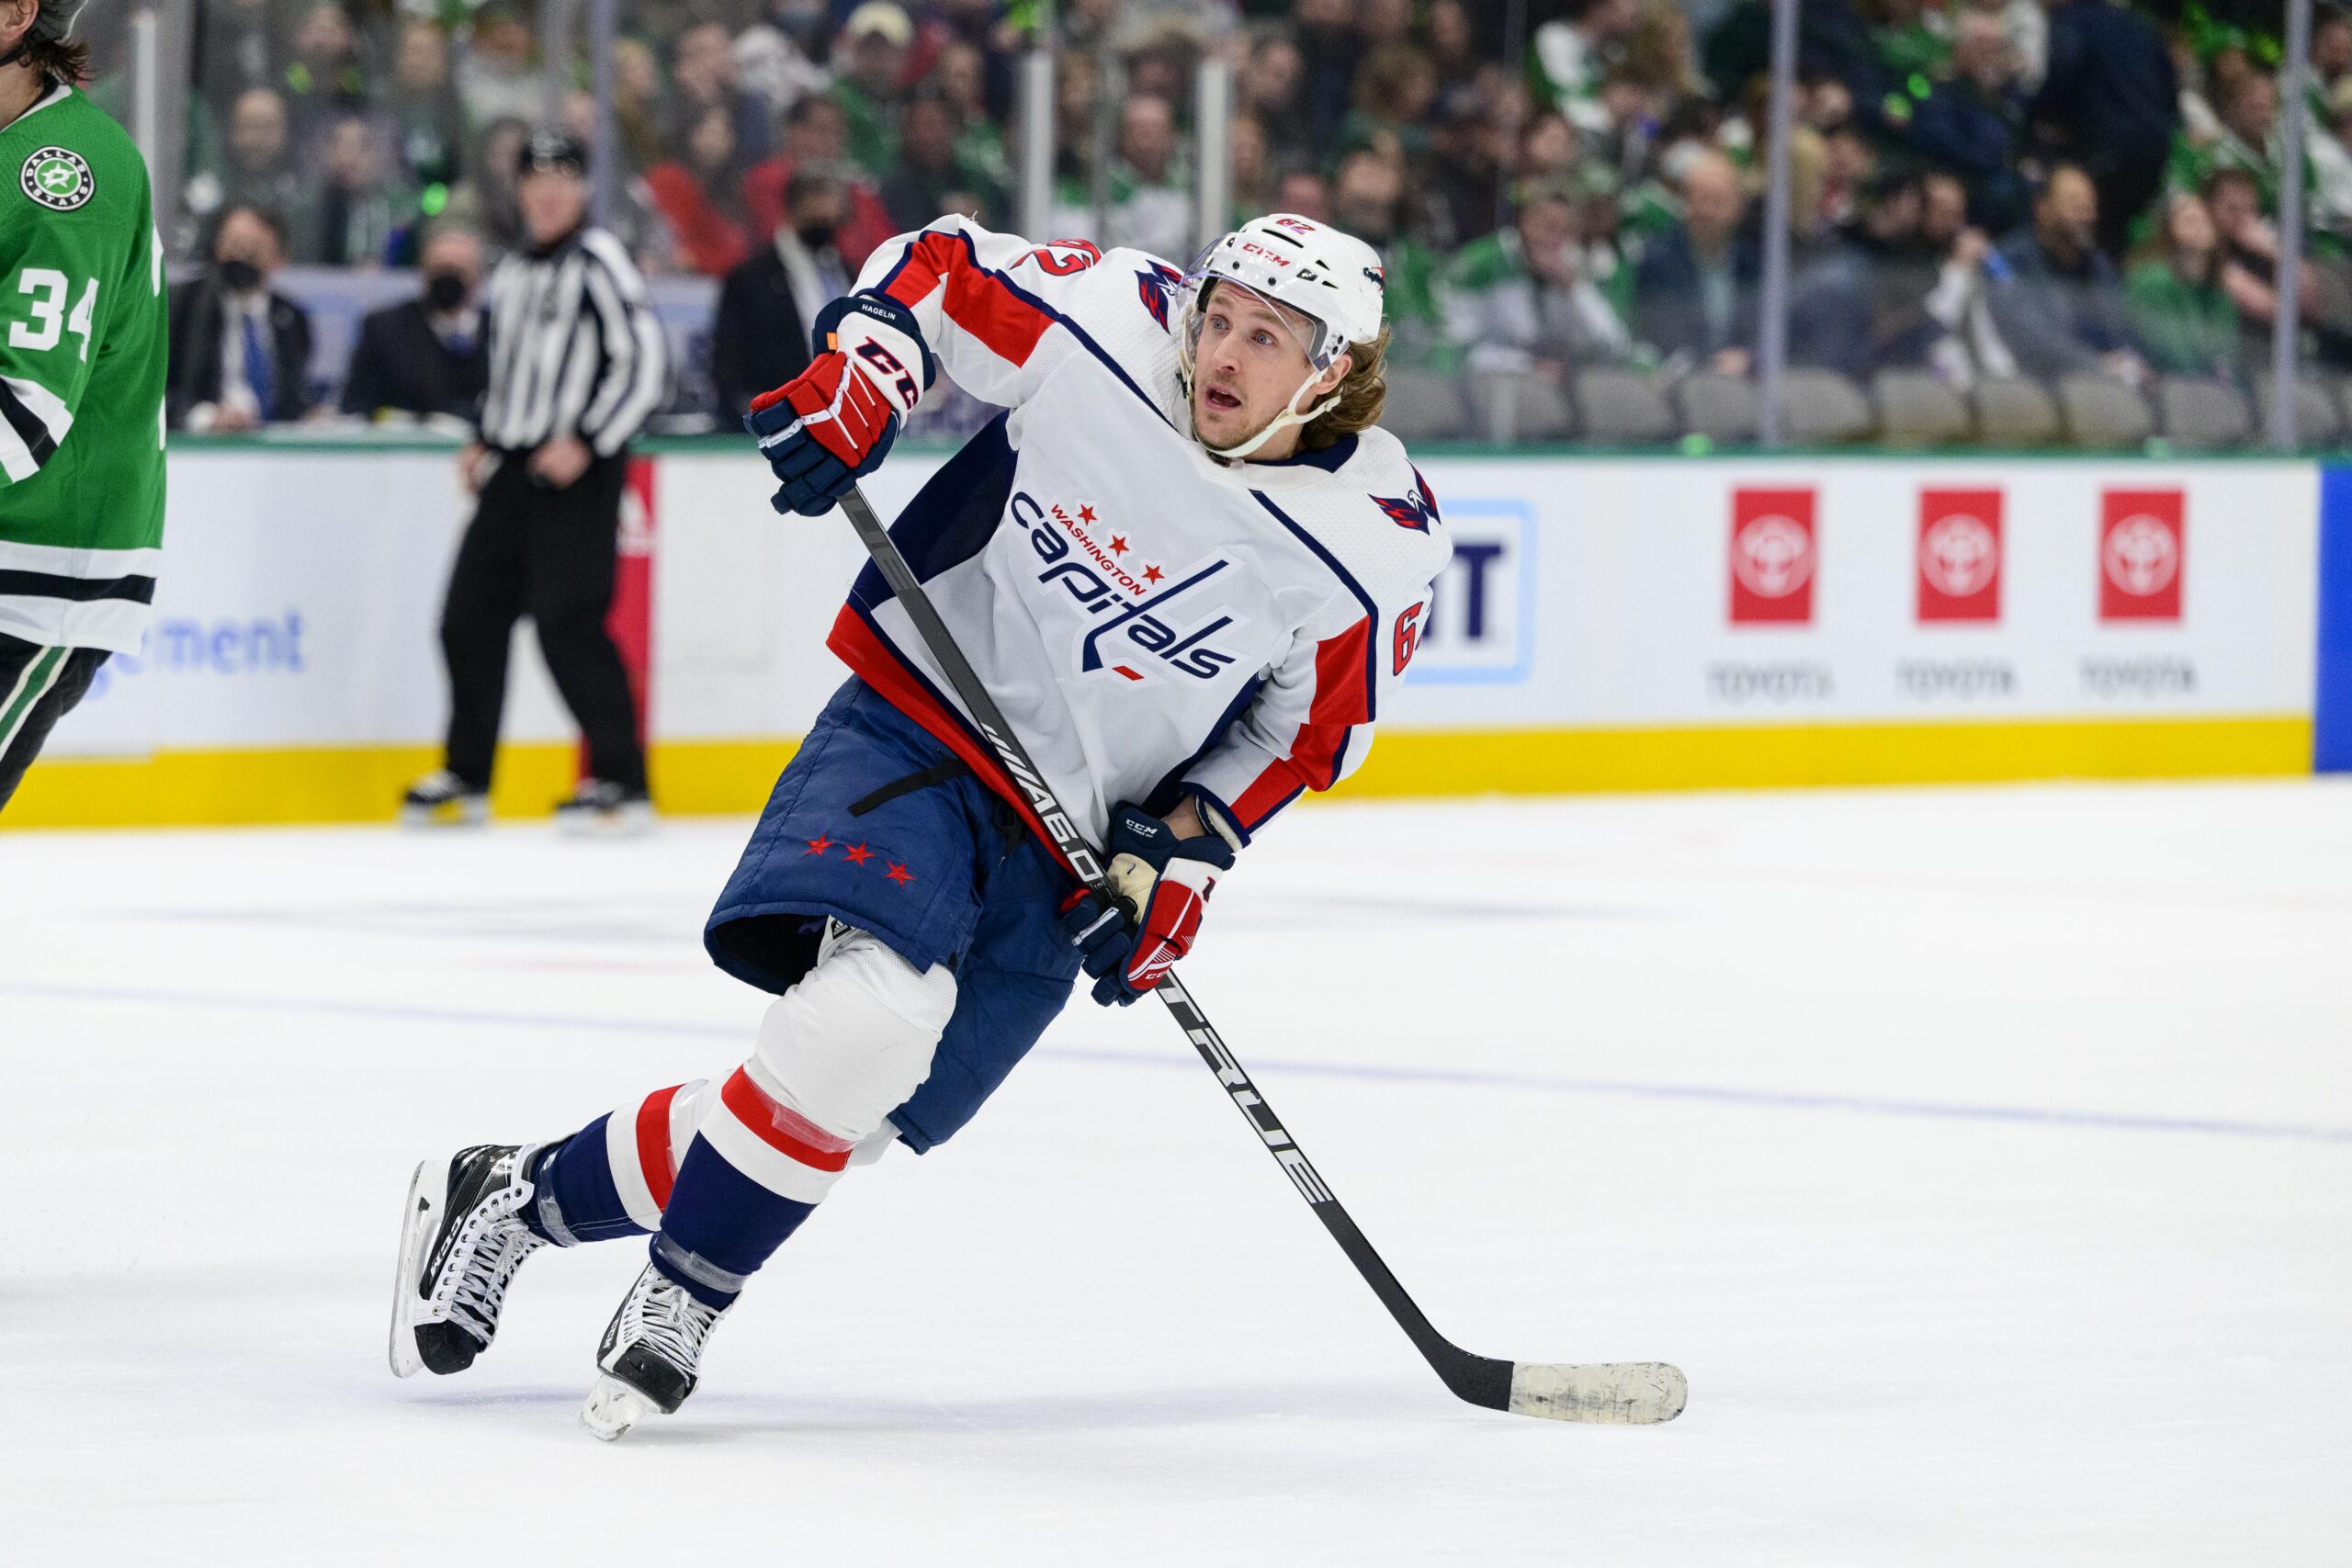 Capitals' winger Carl Hagelin retires from the NHL because of an eye injury